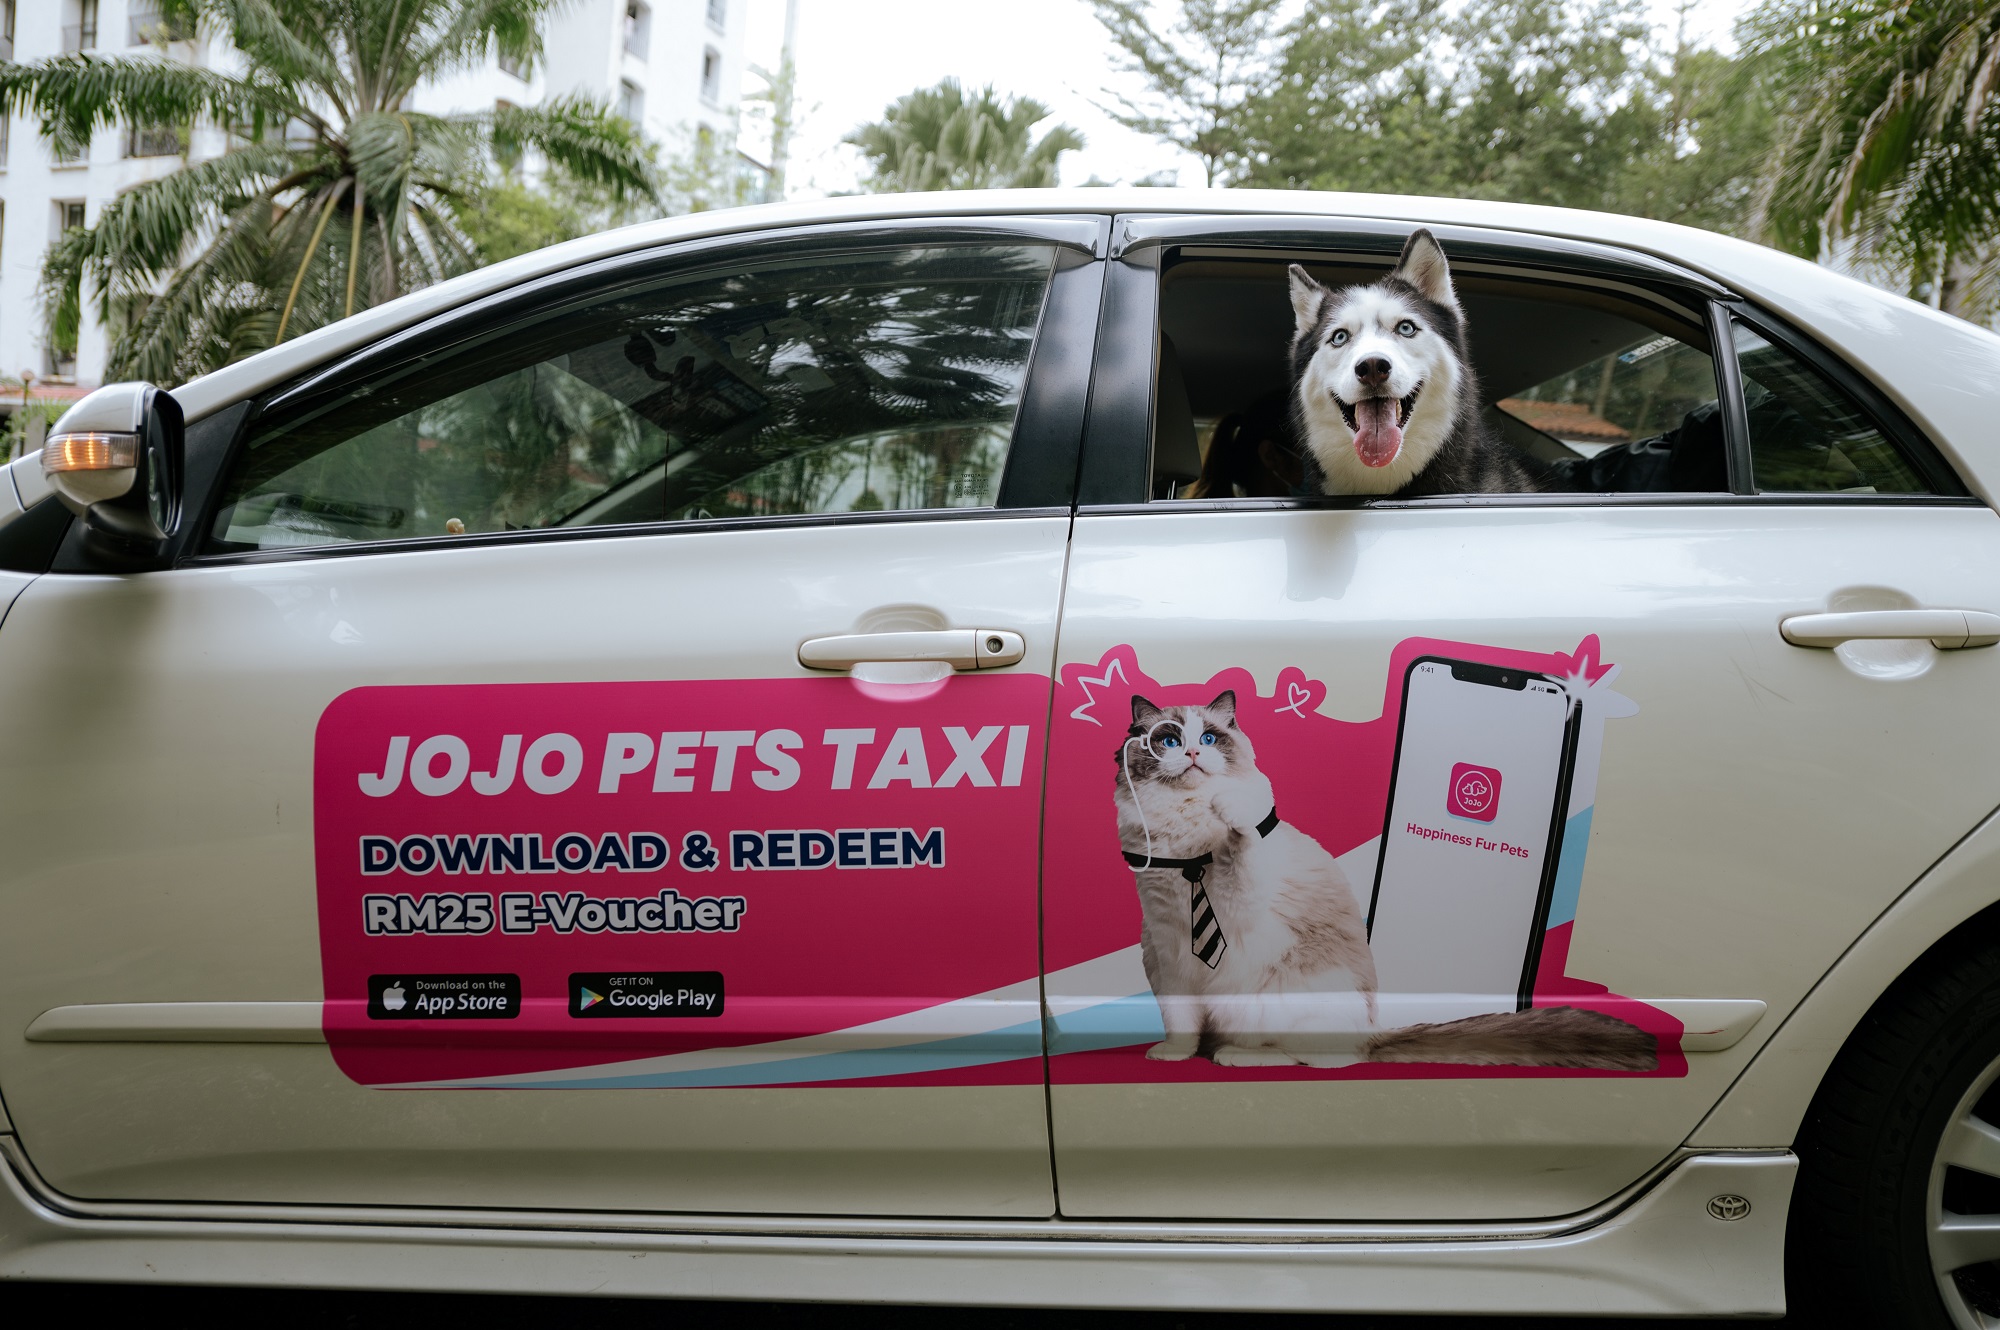 Premium Malaysian pet-hailing app JoJo Pets Taxi aims for nationwide expansion and 100% Year-Over-Year growth for the coming 2023.